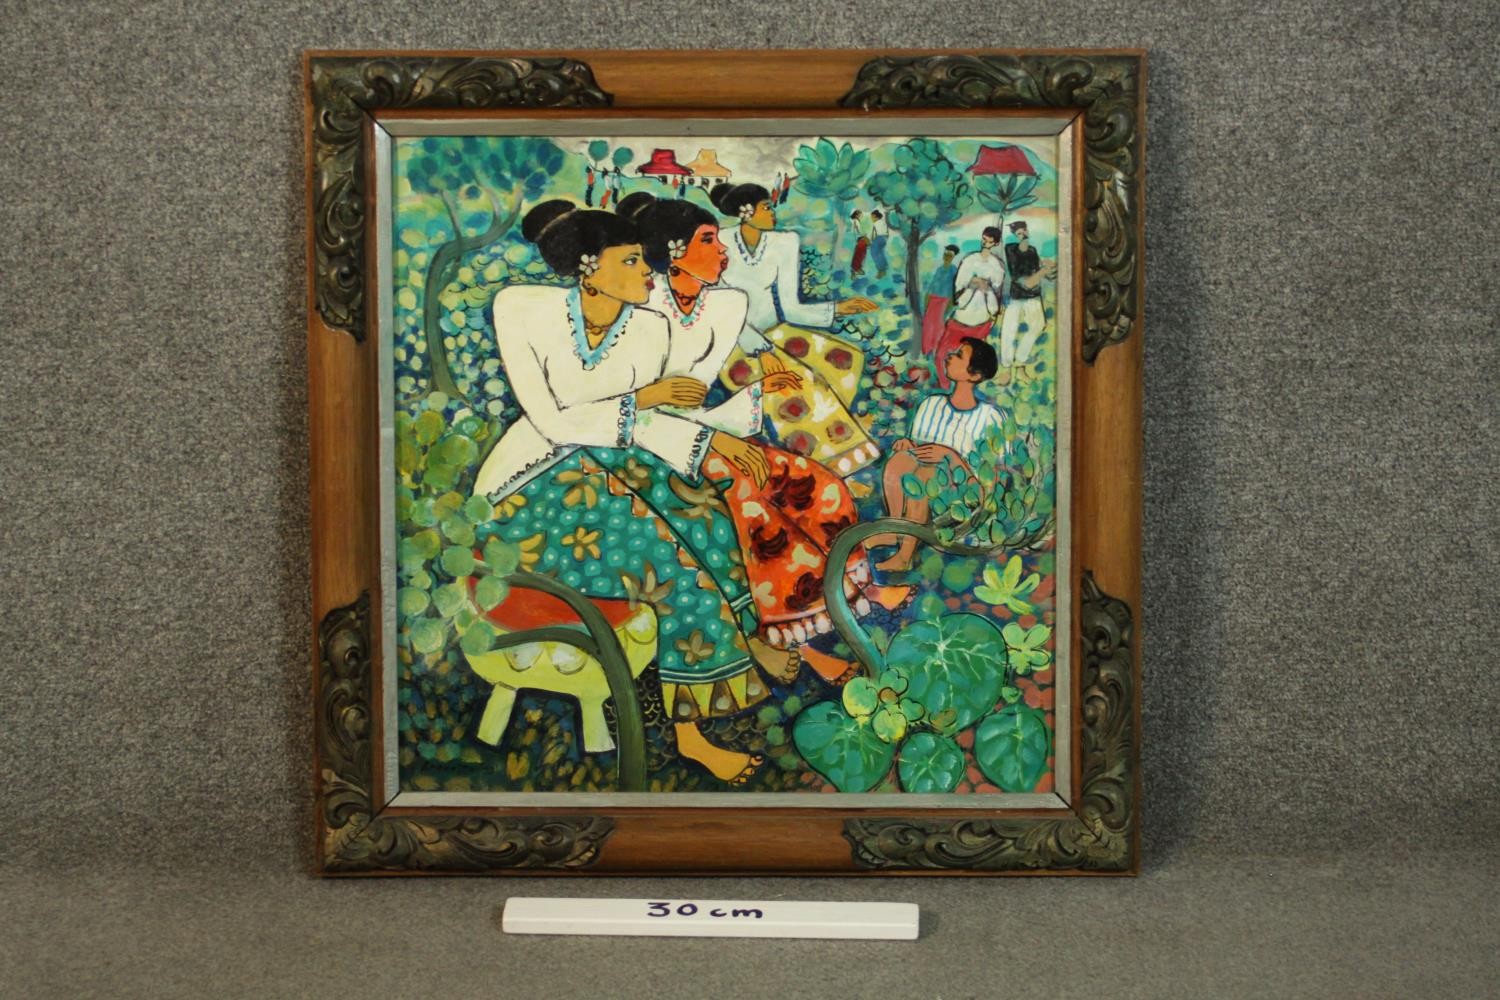 Bramasto (1929 - 1997), oil on canvas of three Indonesian women among foliage, with some figures - Image 3 of 7